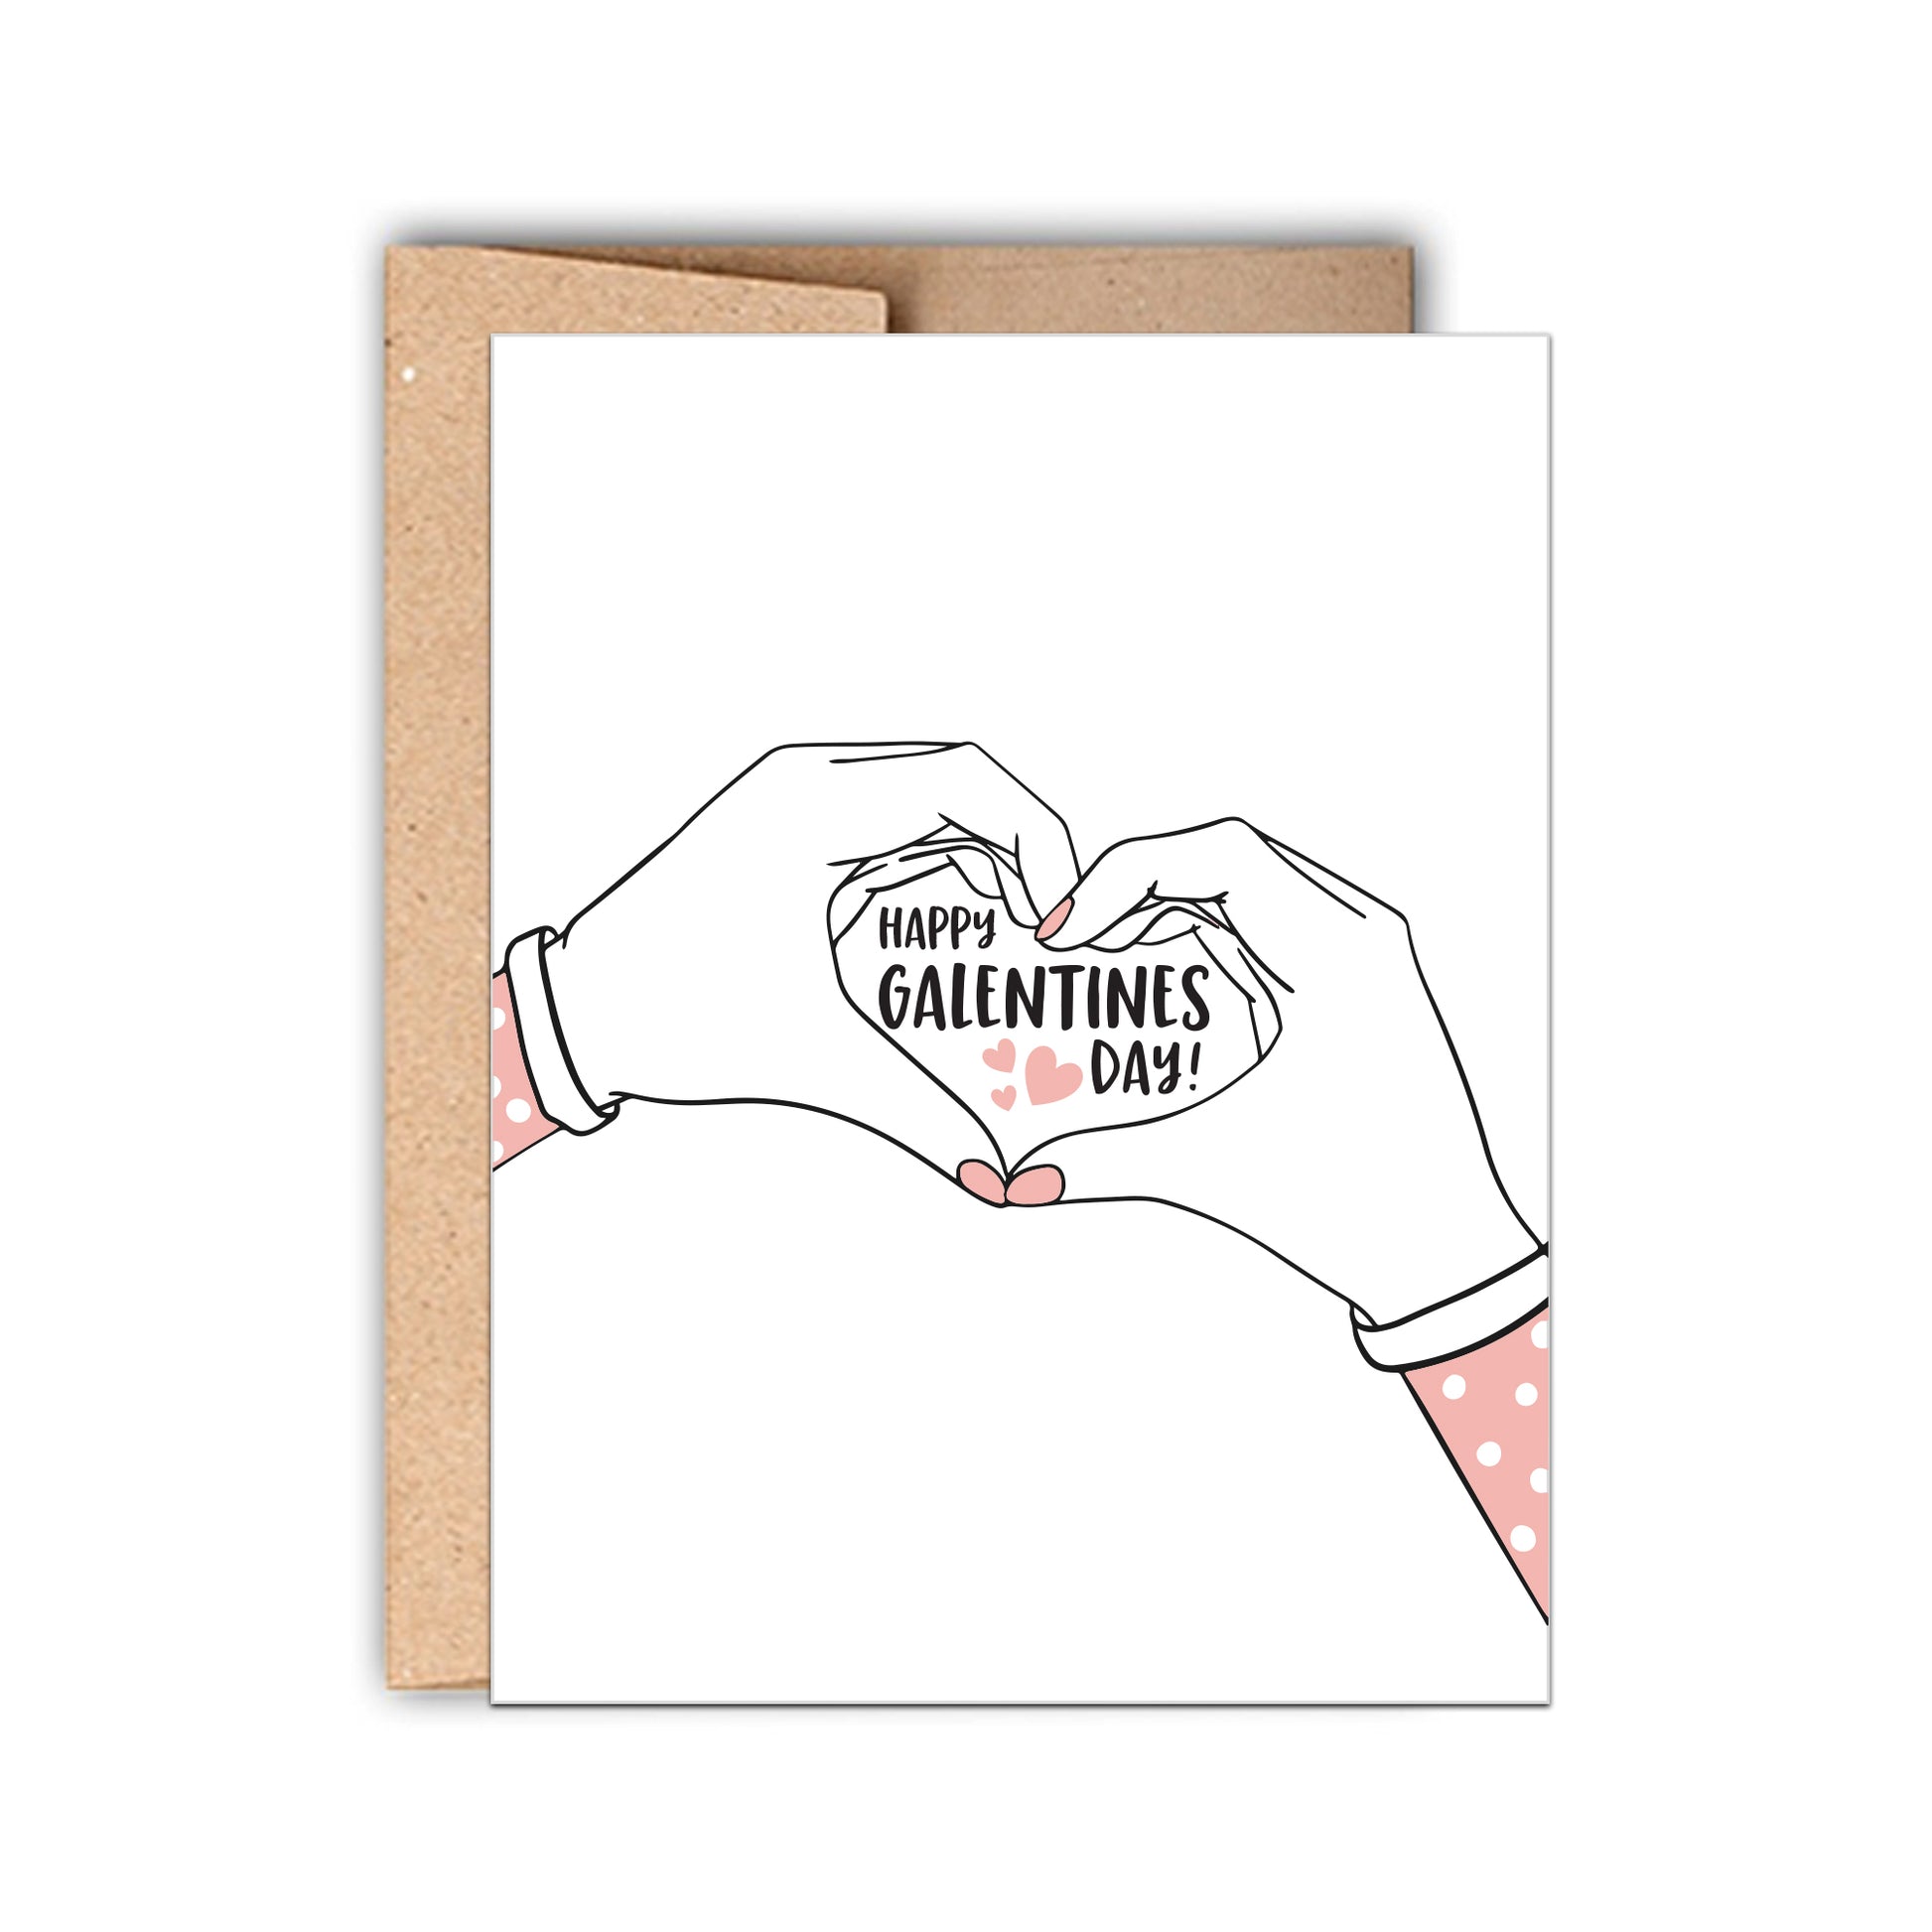 Heart Hands Happy Galentines Day Card for her